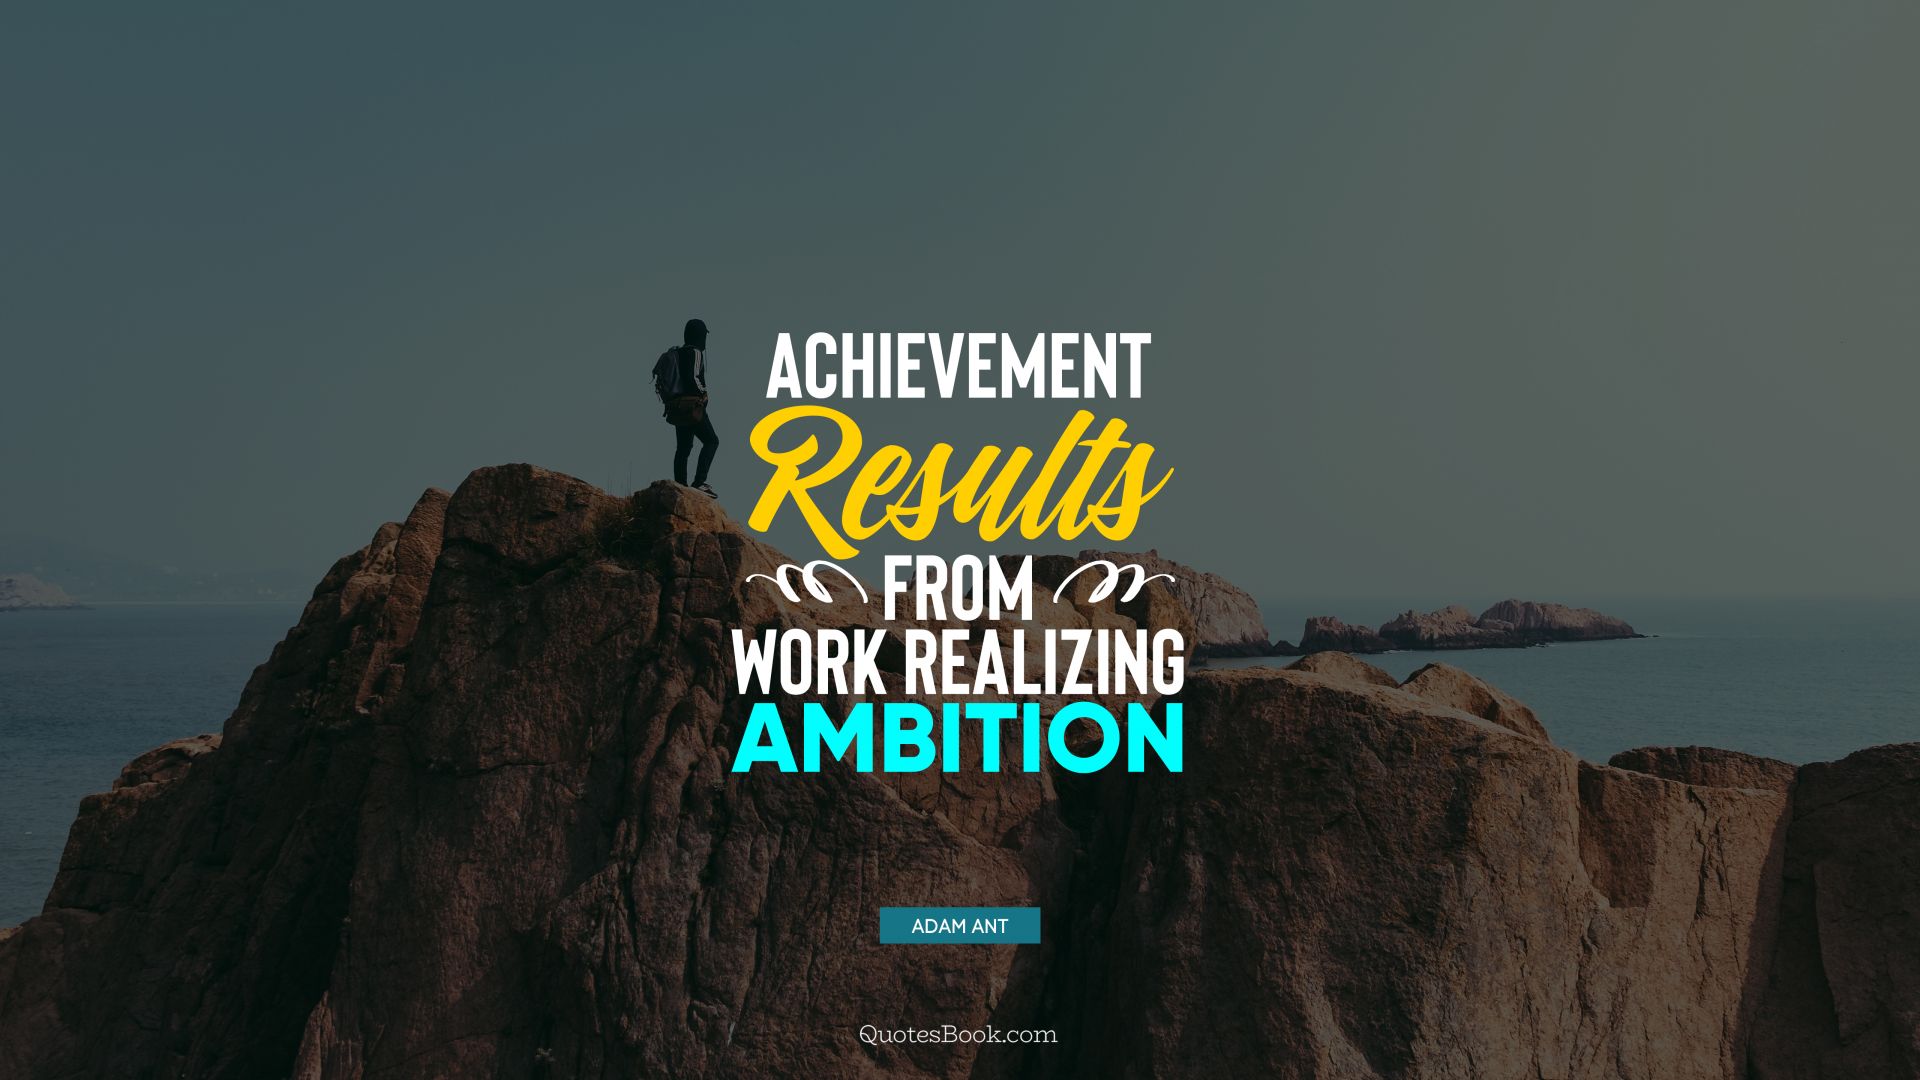 Achievement results from work realizing ambition. - Quote by Adam Ant